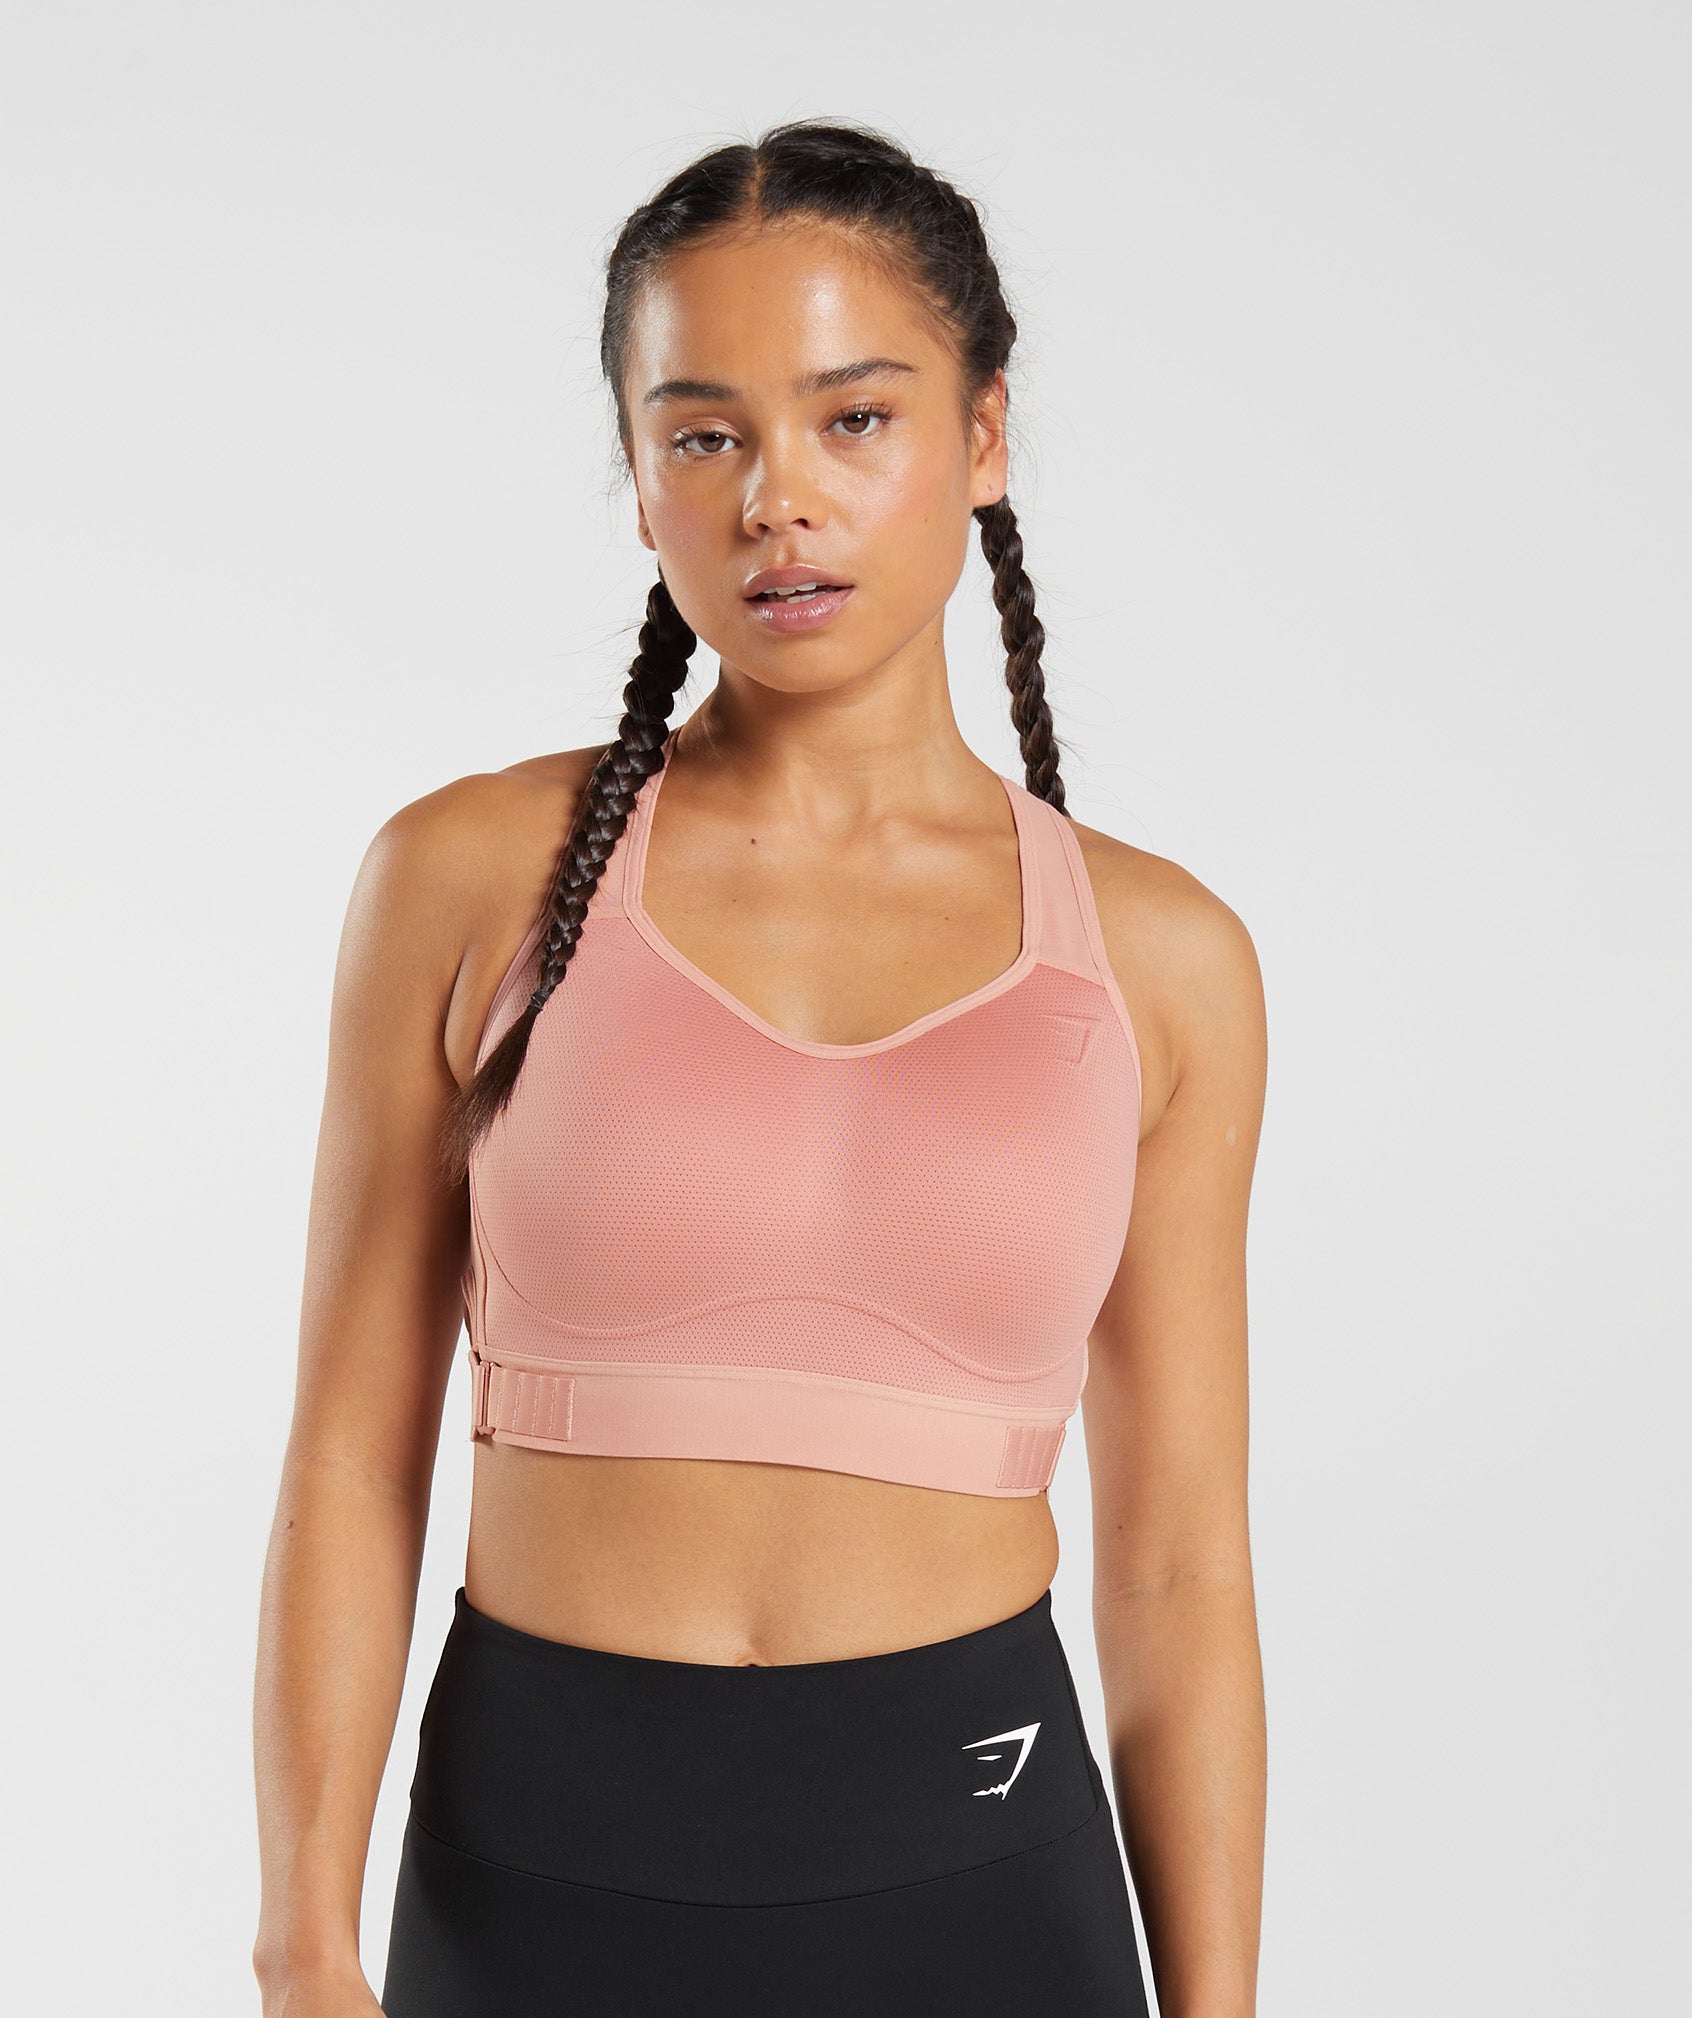 High Impact Sports Bras - For That Extra Bit of Support